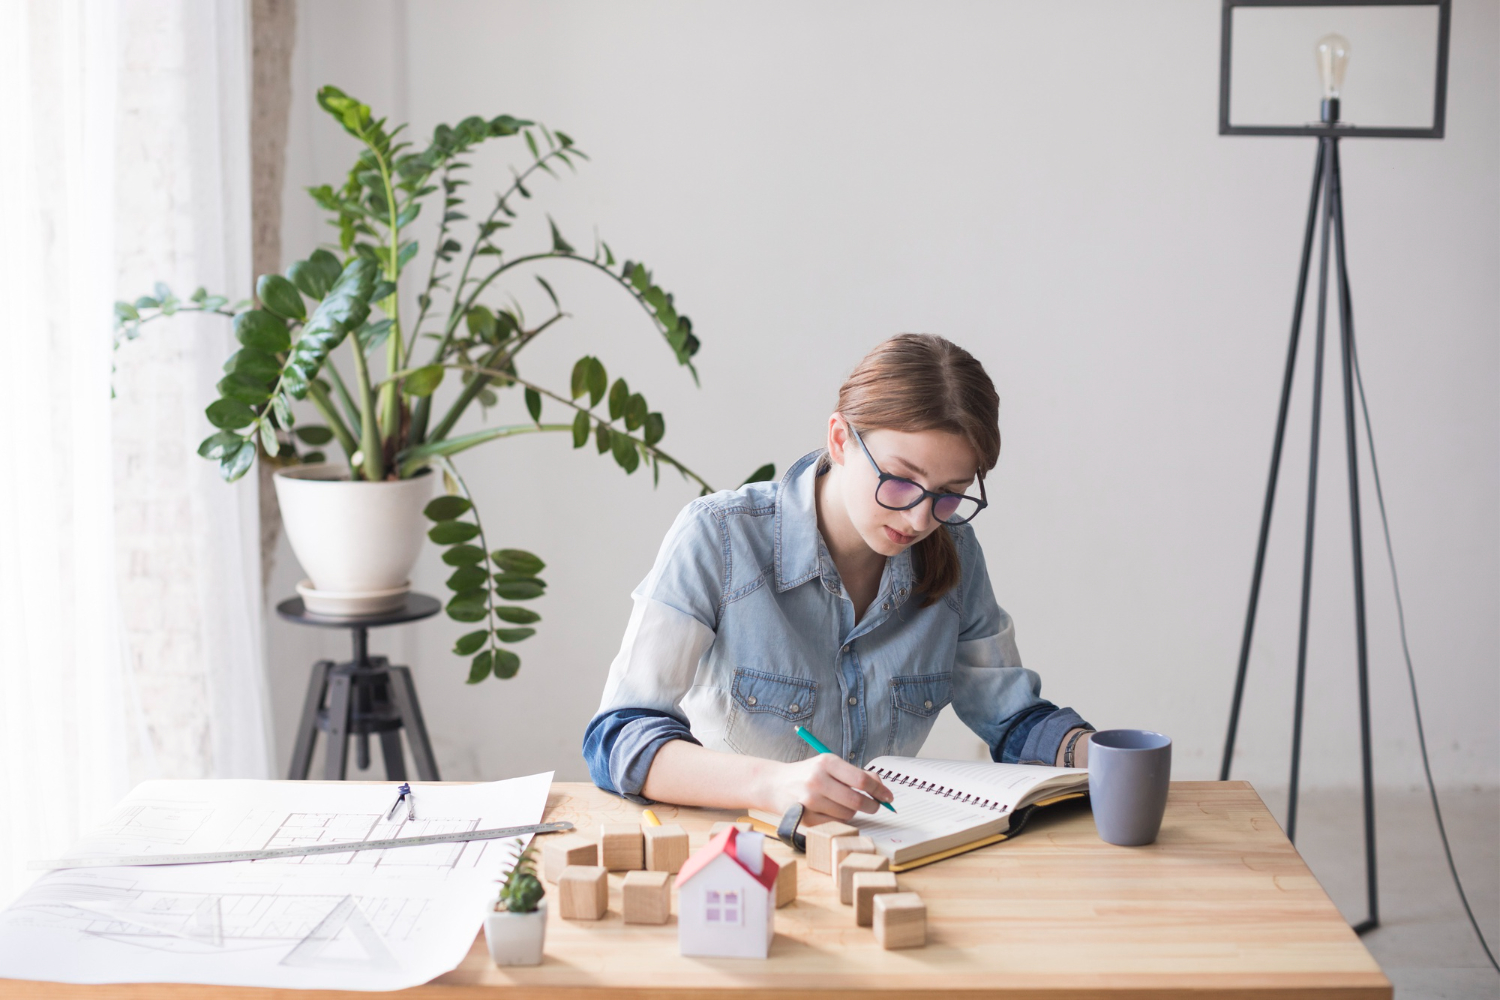 A co-op building manager sits at a table, writing in a notebook, with a small model house, building blocks, and apartment plans spread out on the table in front of her.